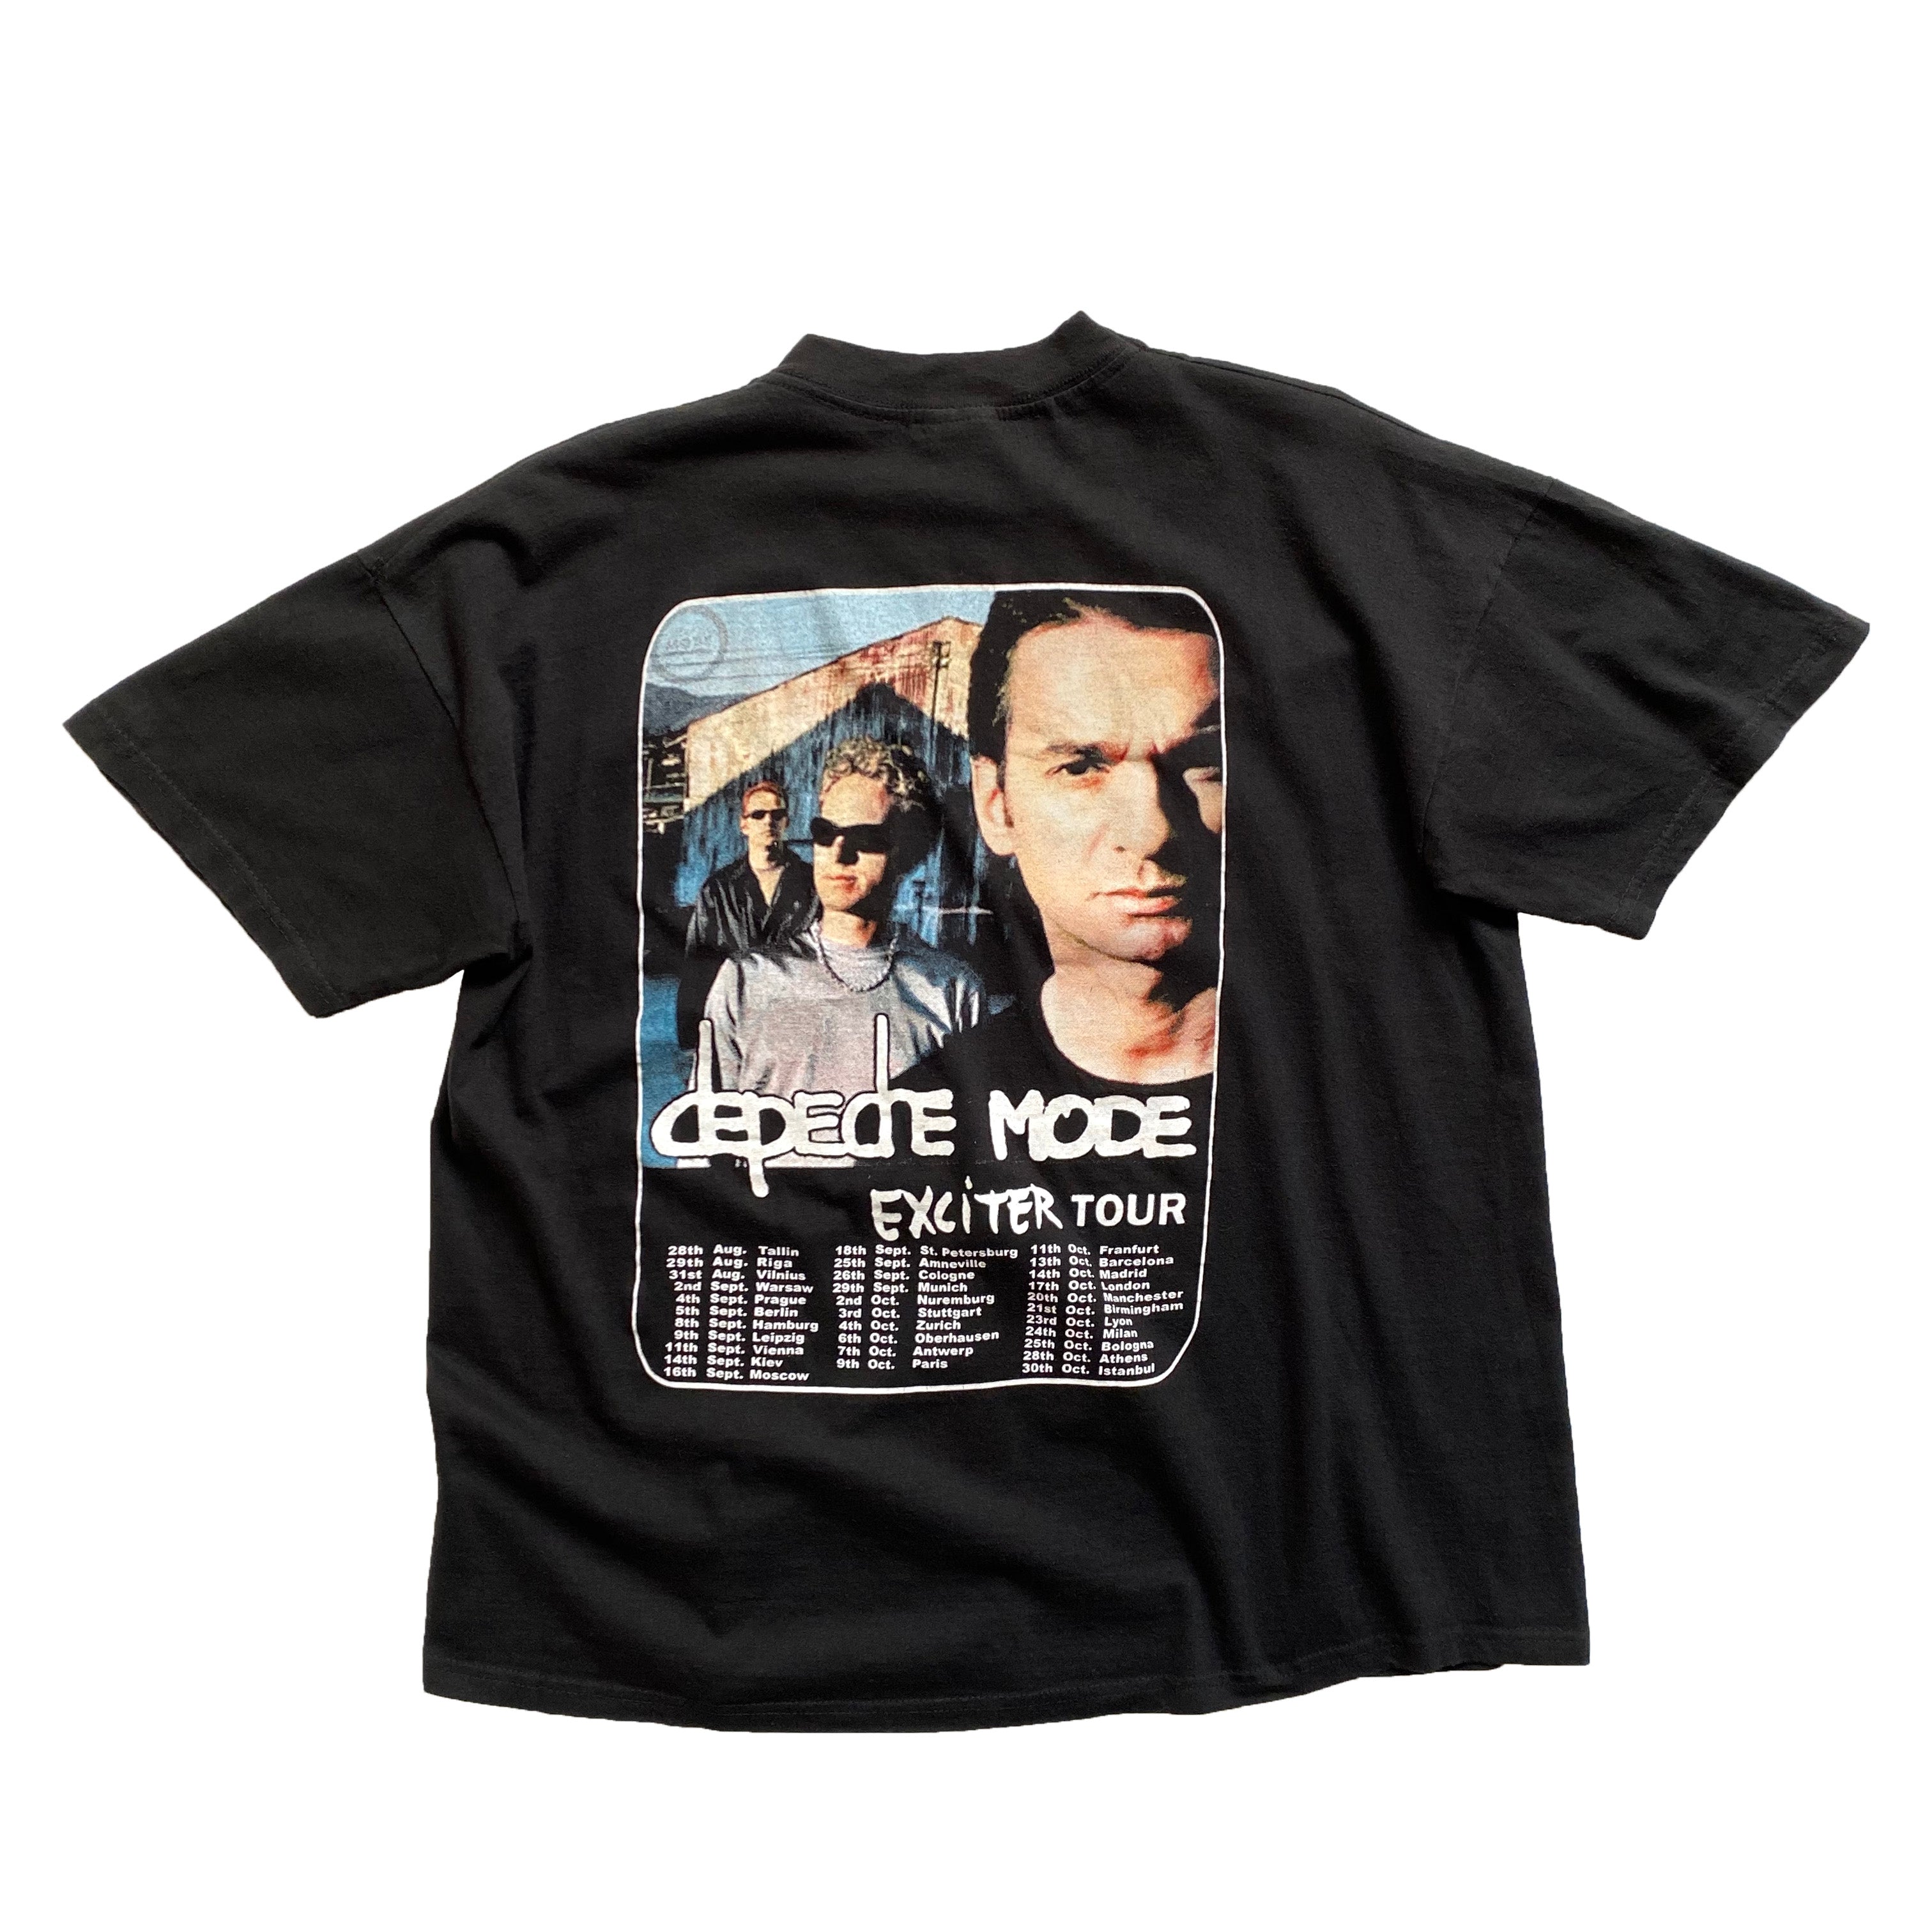 00s Depeche Mode Playing The Angel Tシャツ